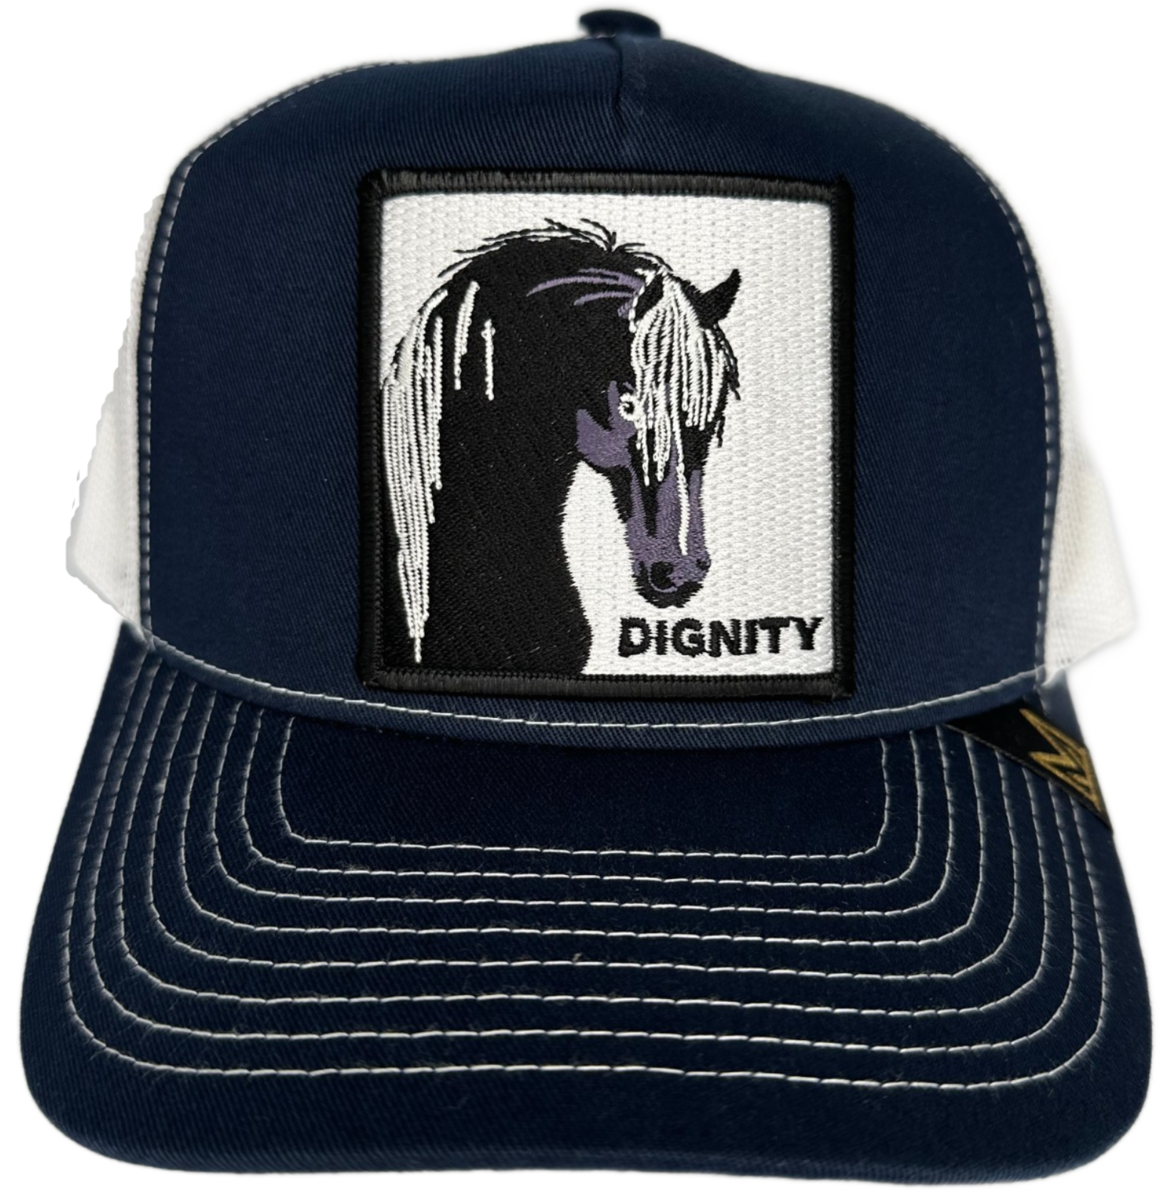 Dignity - Navy Blue